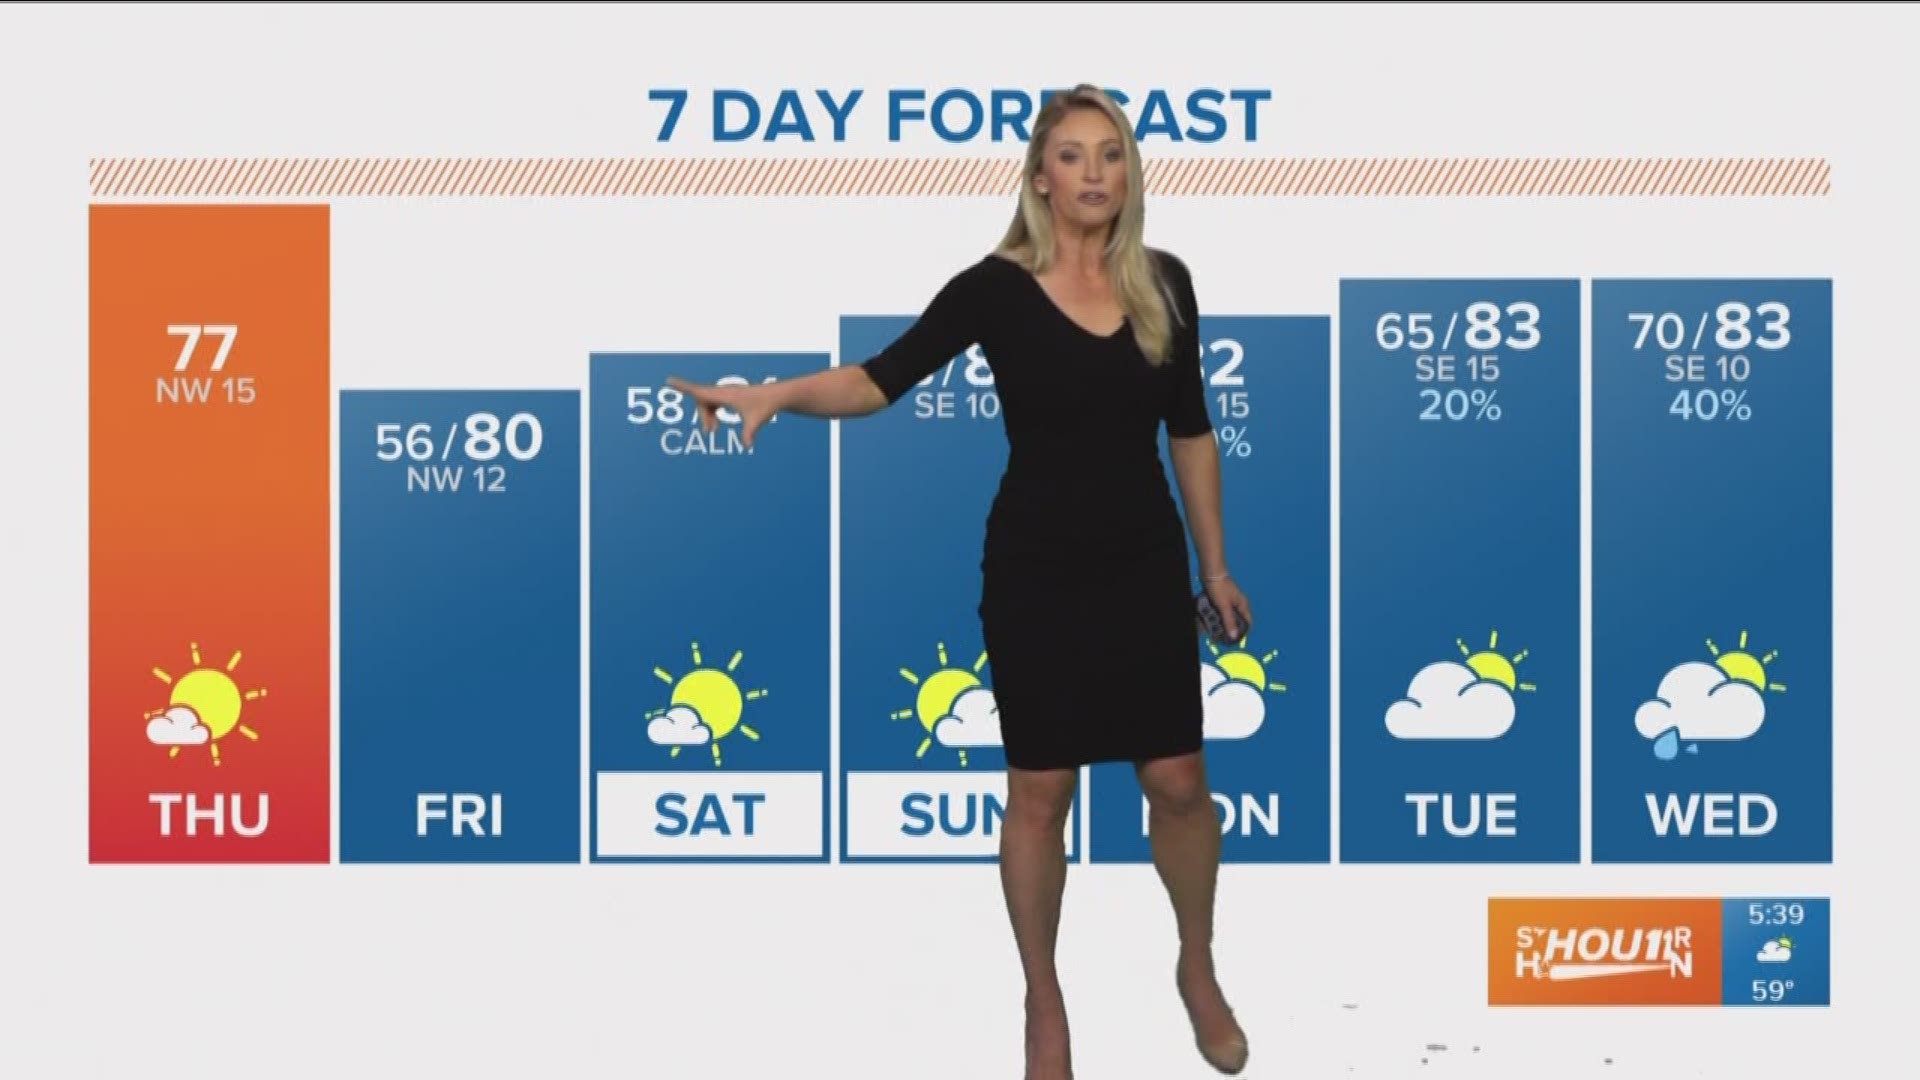 KHOU 11 Meteorologist Chita Craft says there is plenty of sunshine in the forecast